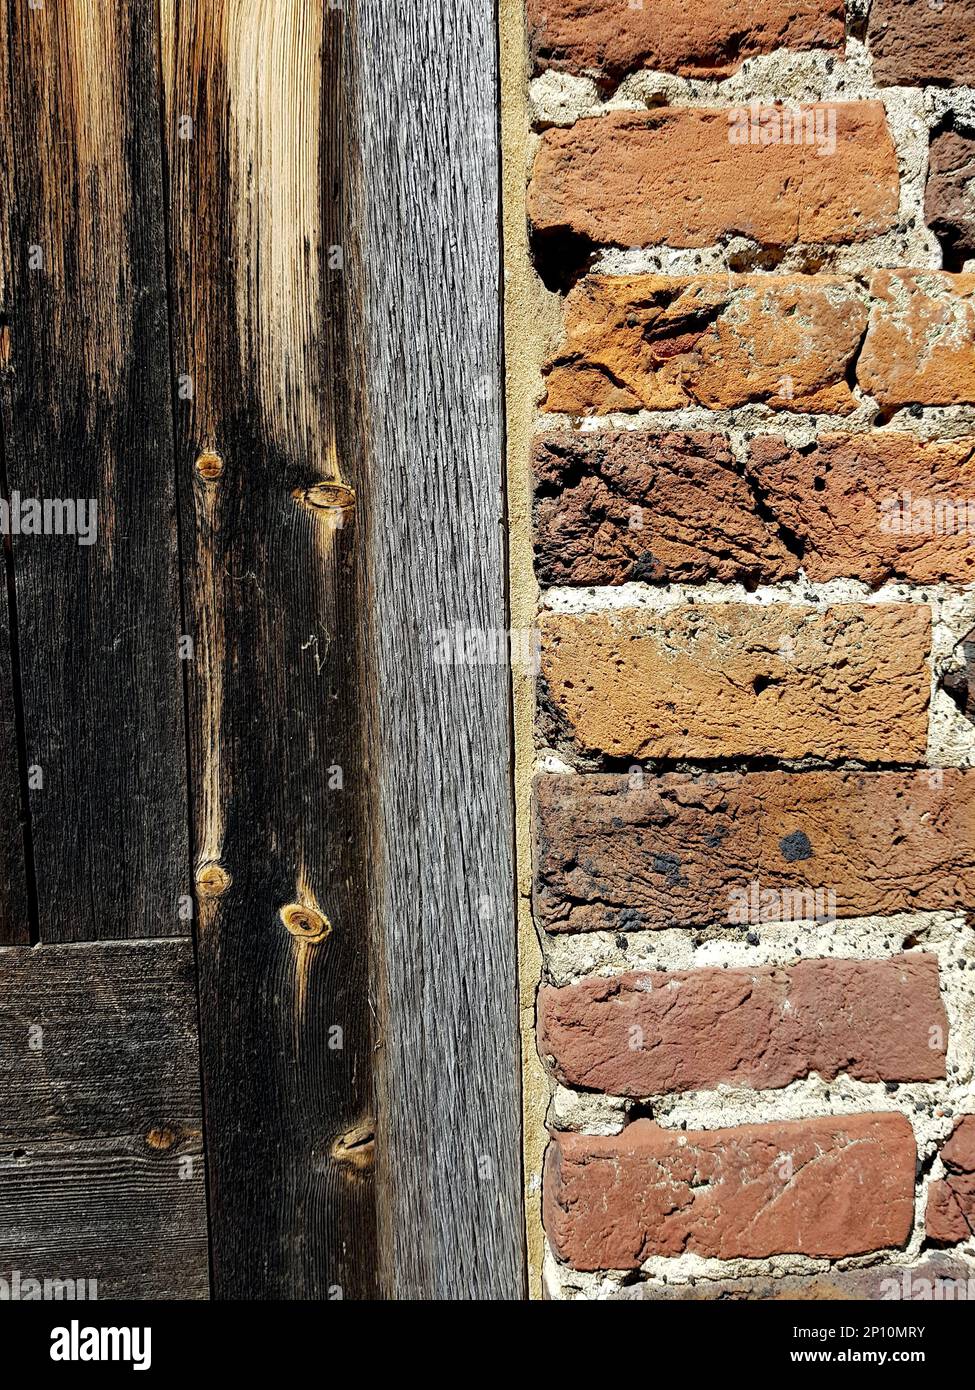 Detail from a traditional wooden door set into a red brick wall. Stock Photo